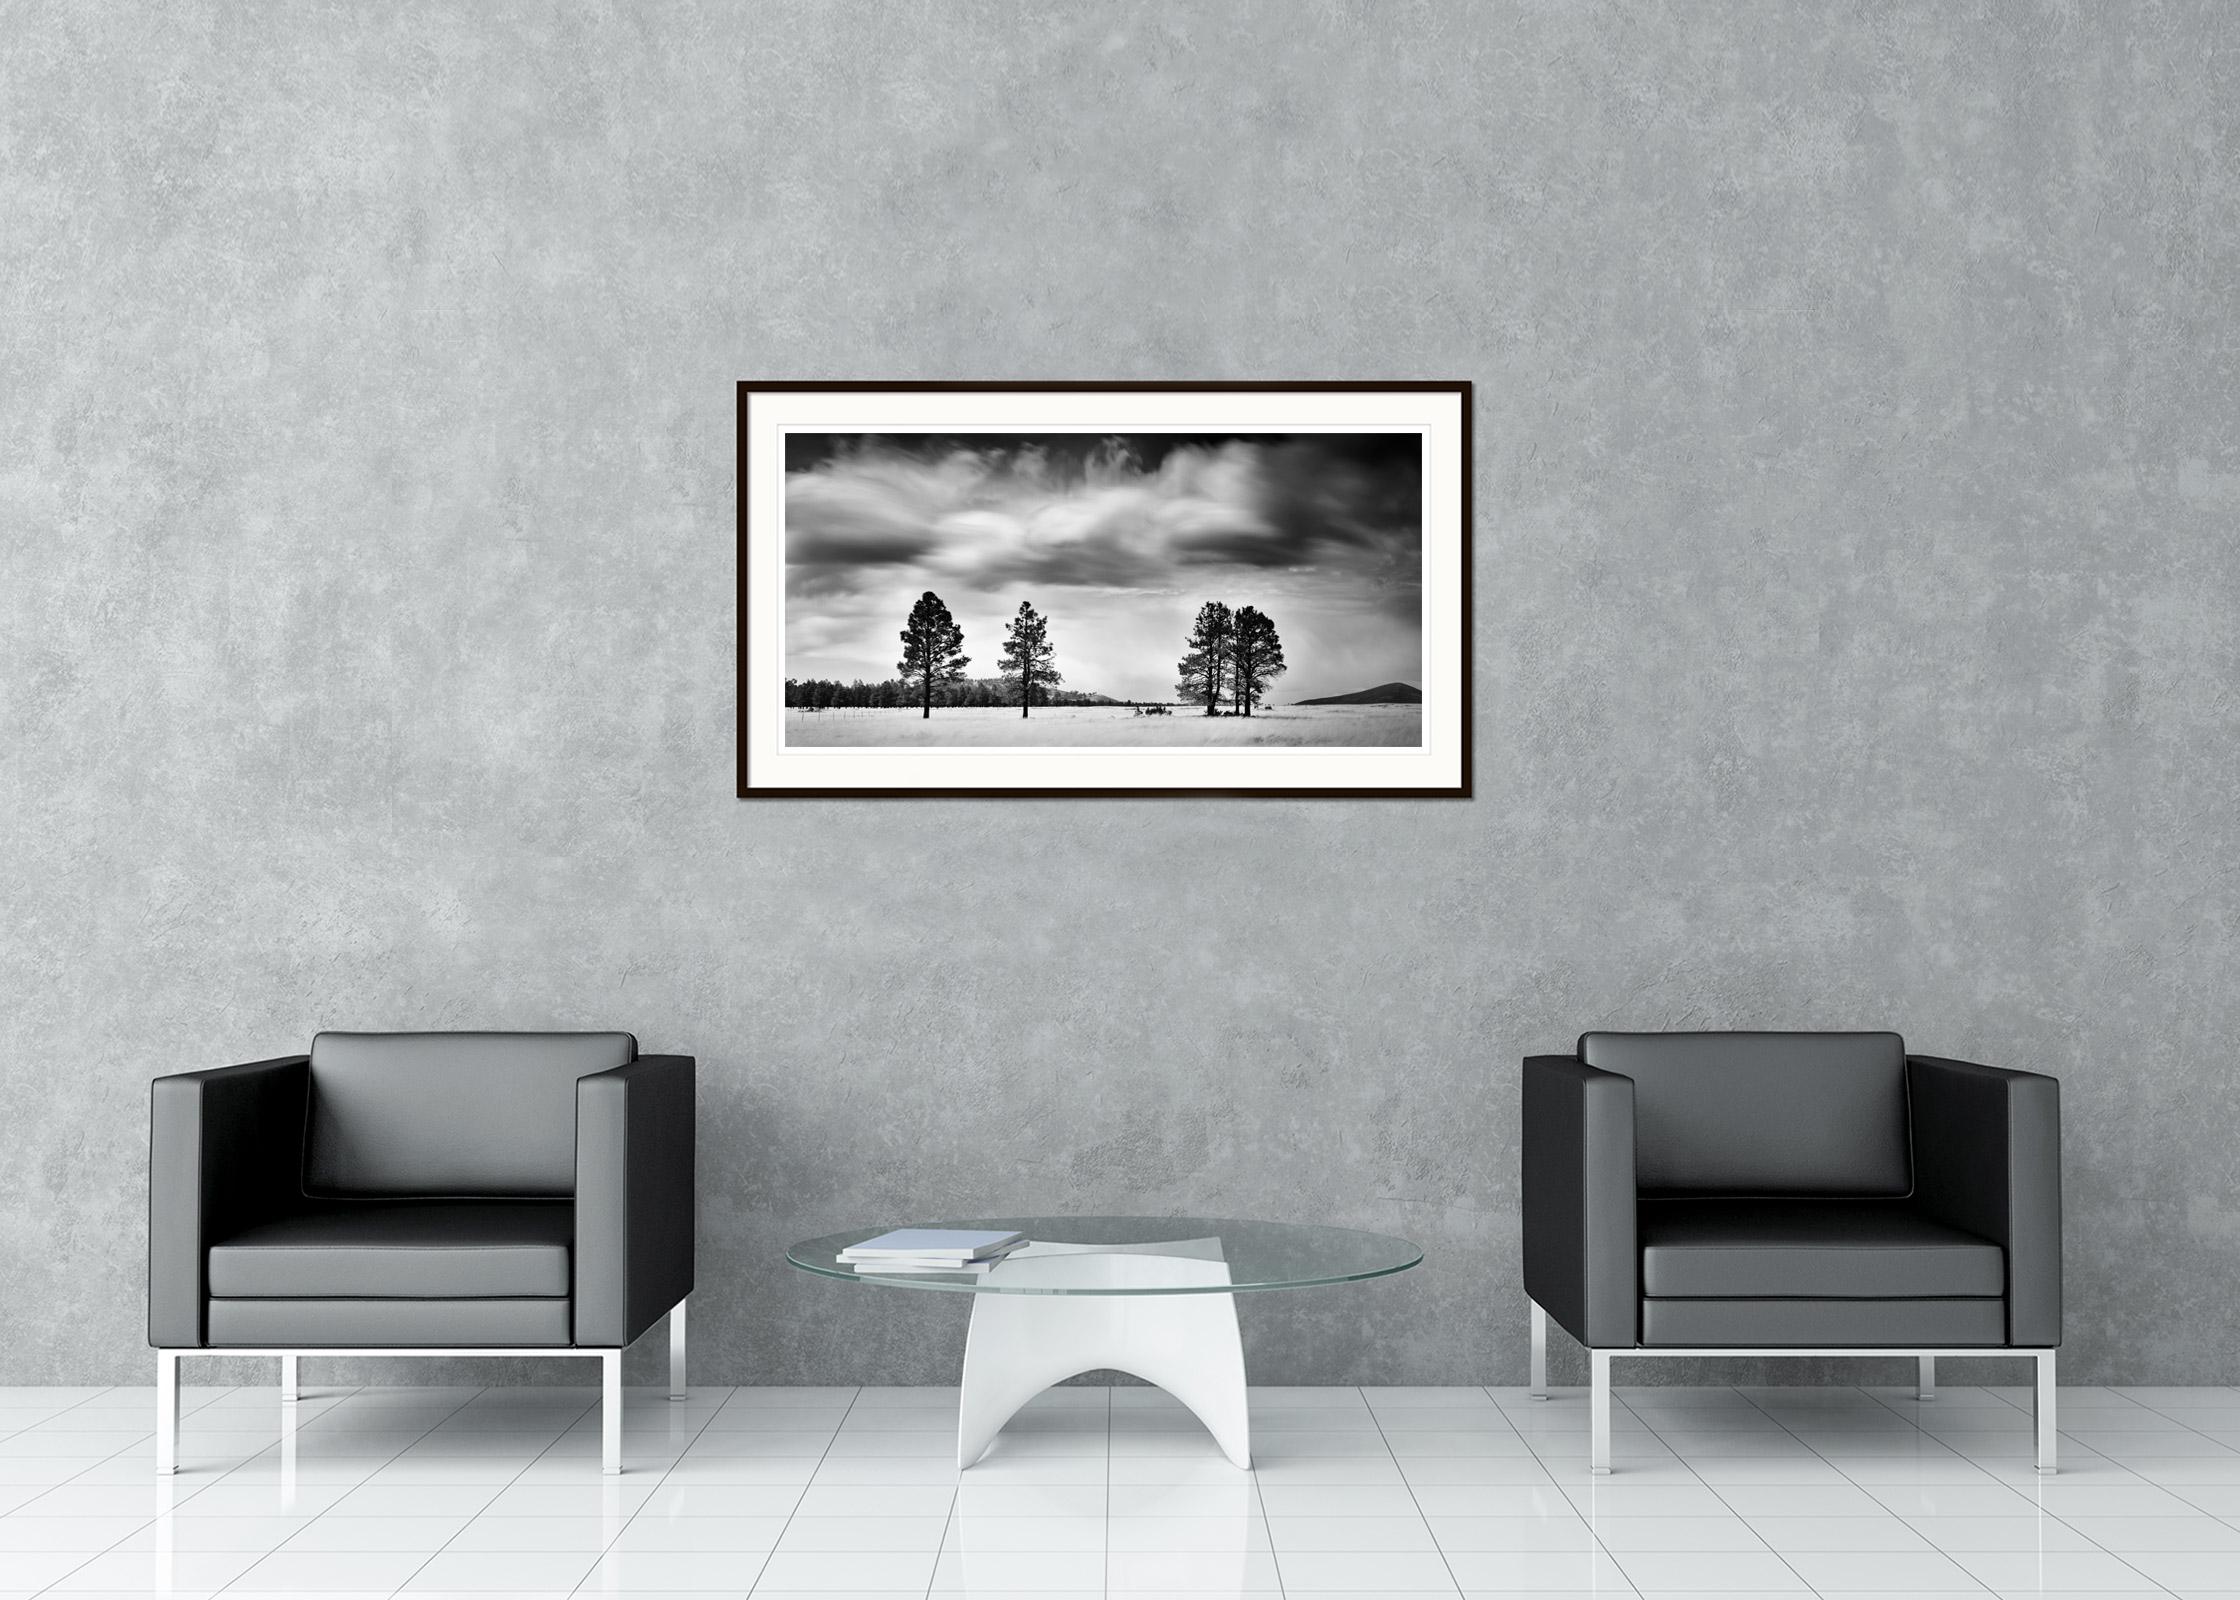 Black and white fine art long exposure landscape photography. Archival pigment ink print as part of a limited edition of 9. All Gerald Berghammer prints are made to order in limited editions on Hahnemuehle Photo Rag Baryta. Each print is stamped on